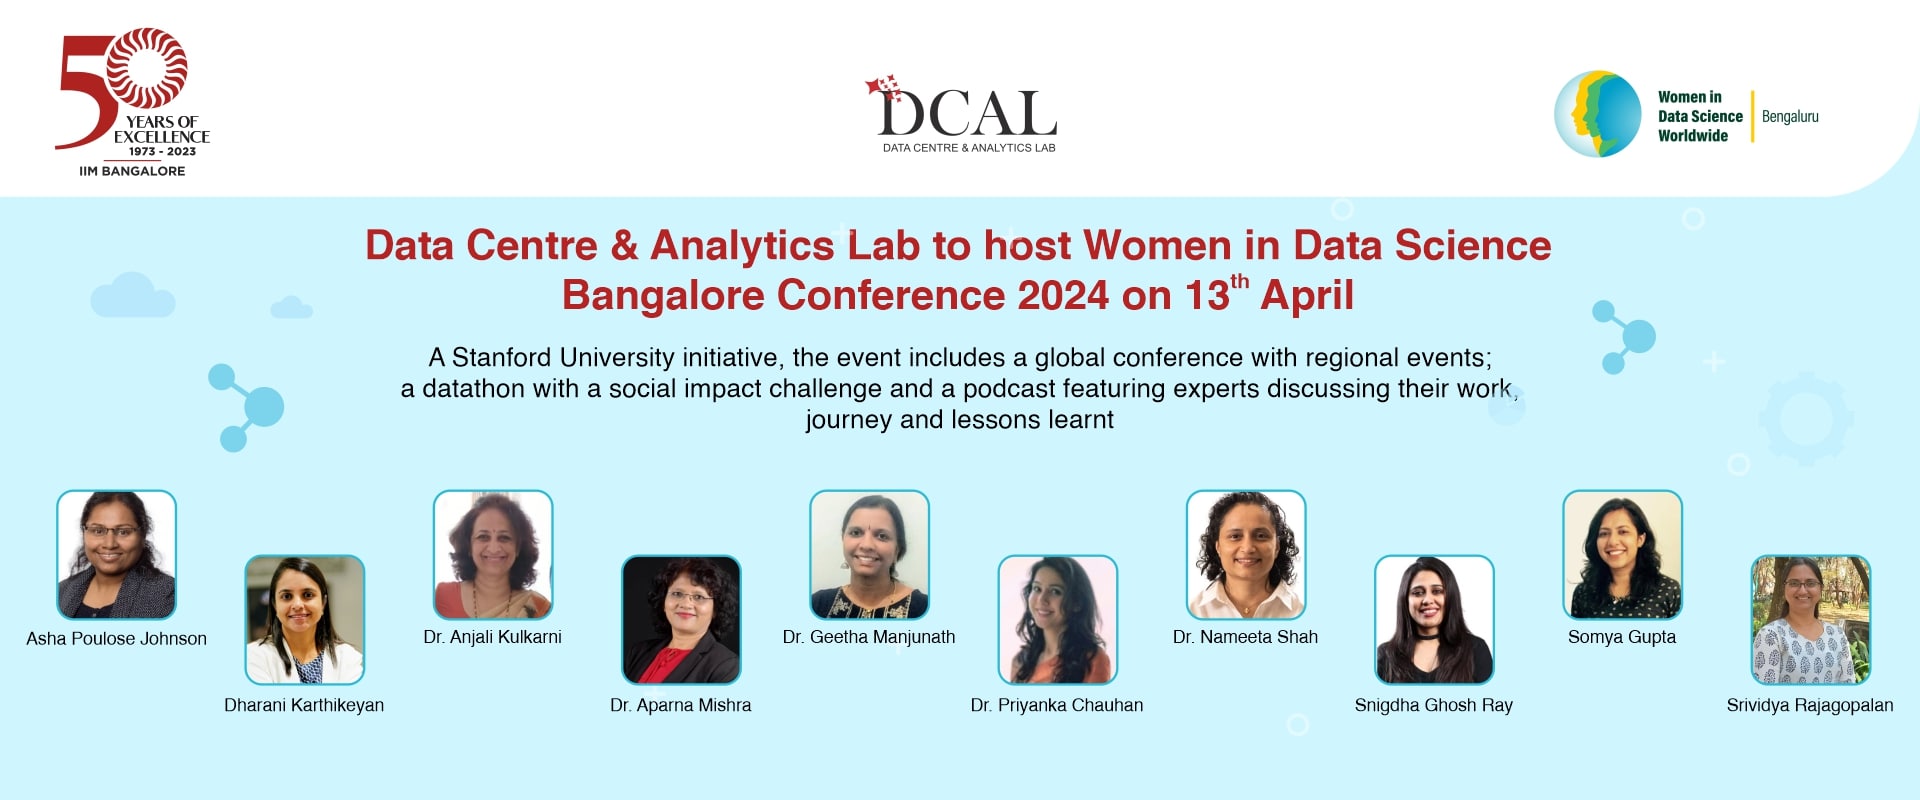 Data Centre & Analytics Lab to host Women in Data Science Bangalore Conference 2024 on 13th April 